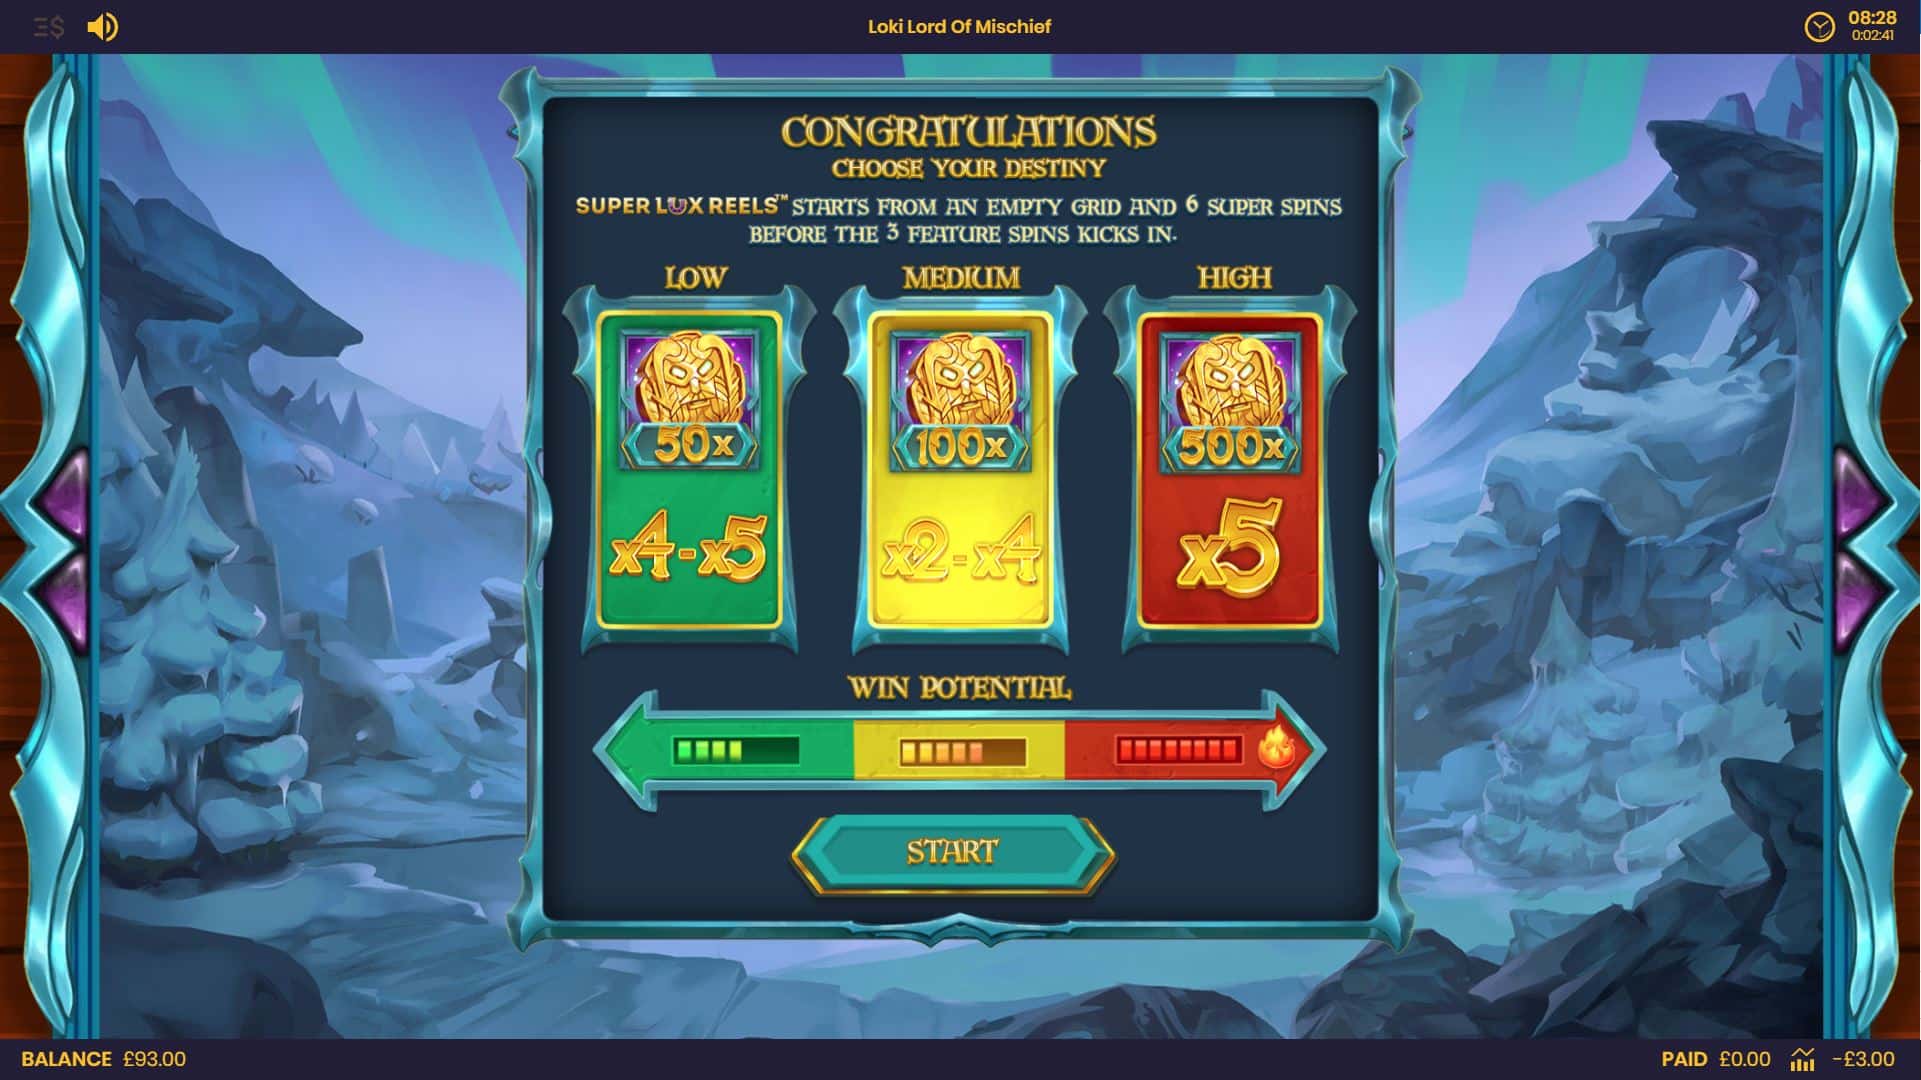 Loki Lord of Mischief slot game features